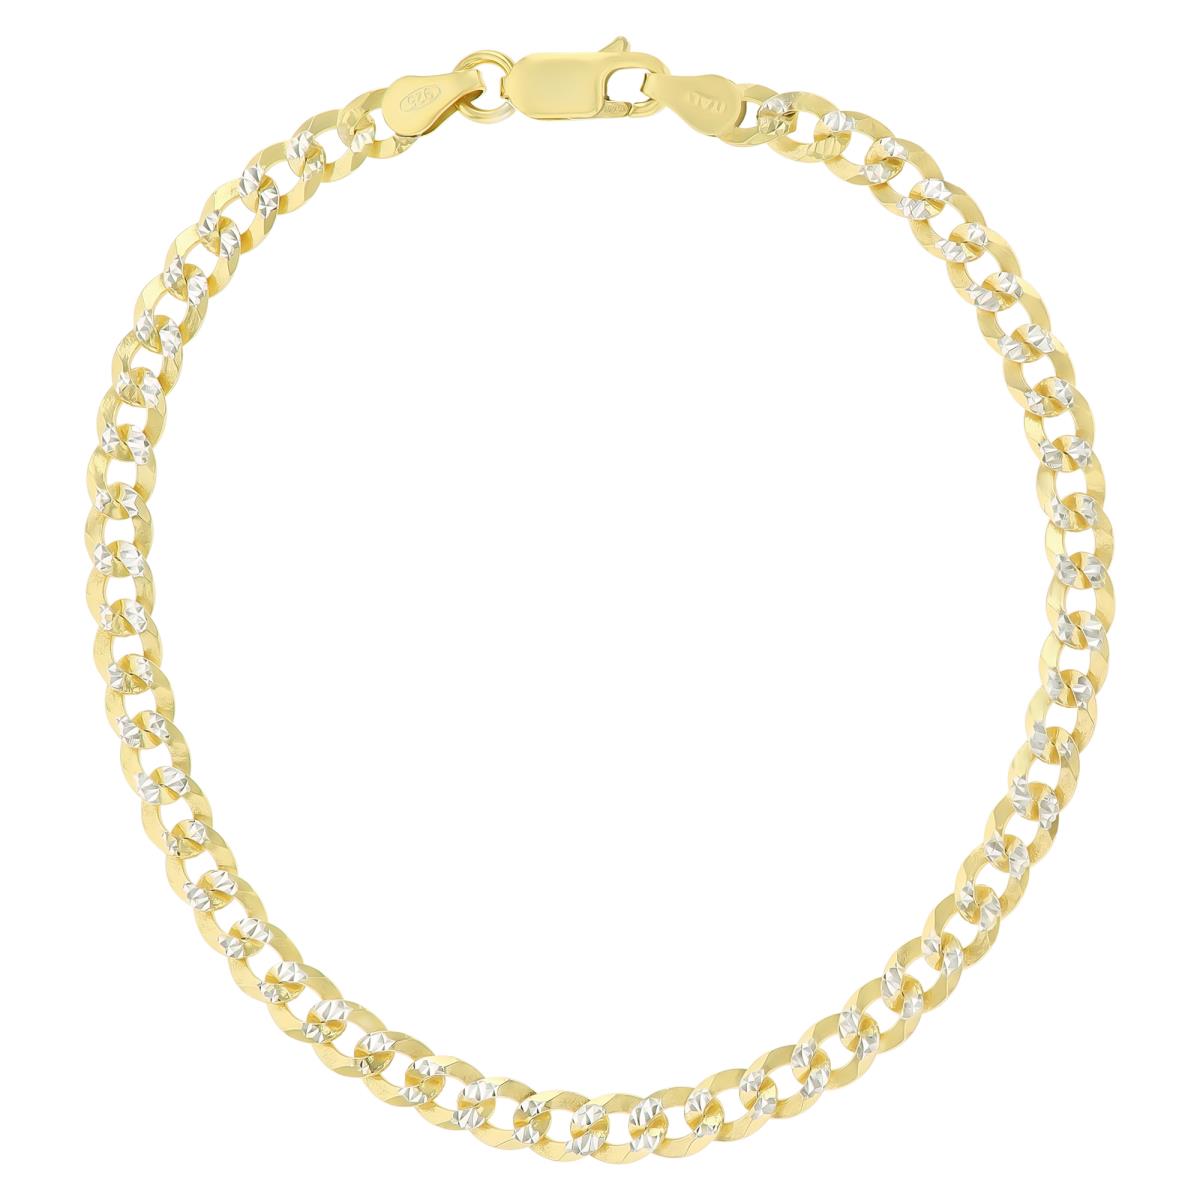 Sterling Silver Two-Tone DC 4.5mm 120 Curb Pave 8.25"Chain Bracelet